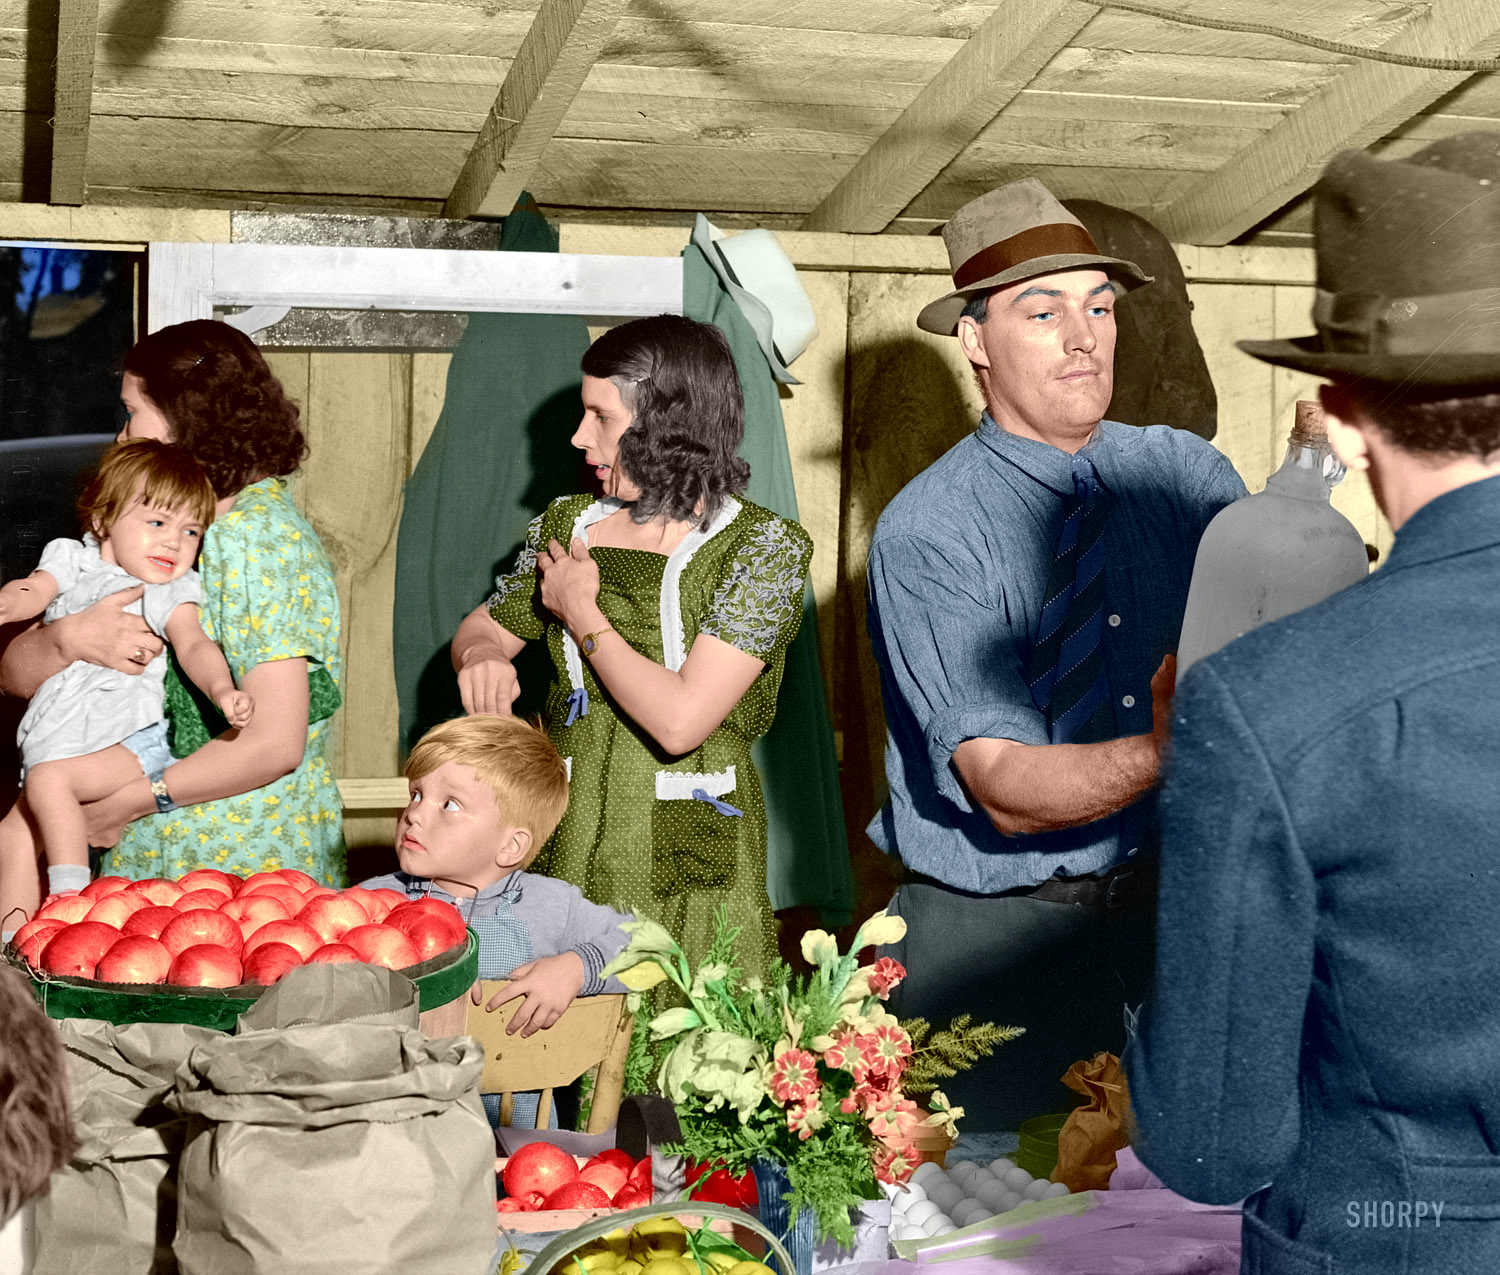 A colorized version of this 1940 photo by Jack Delano. View full size.